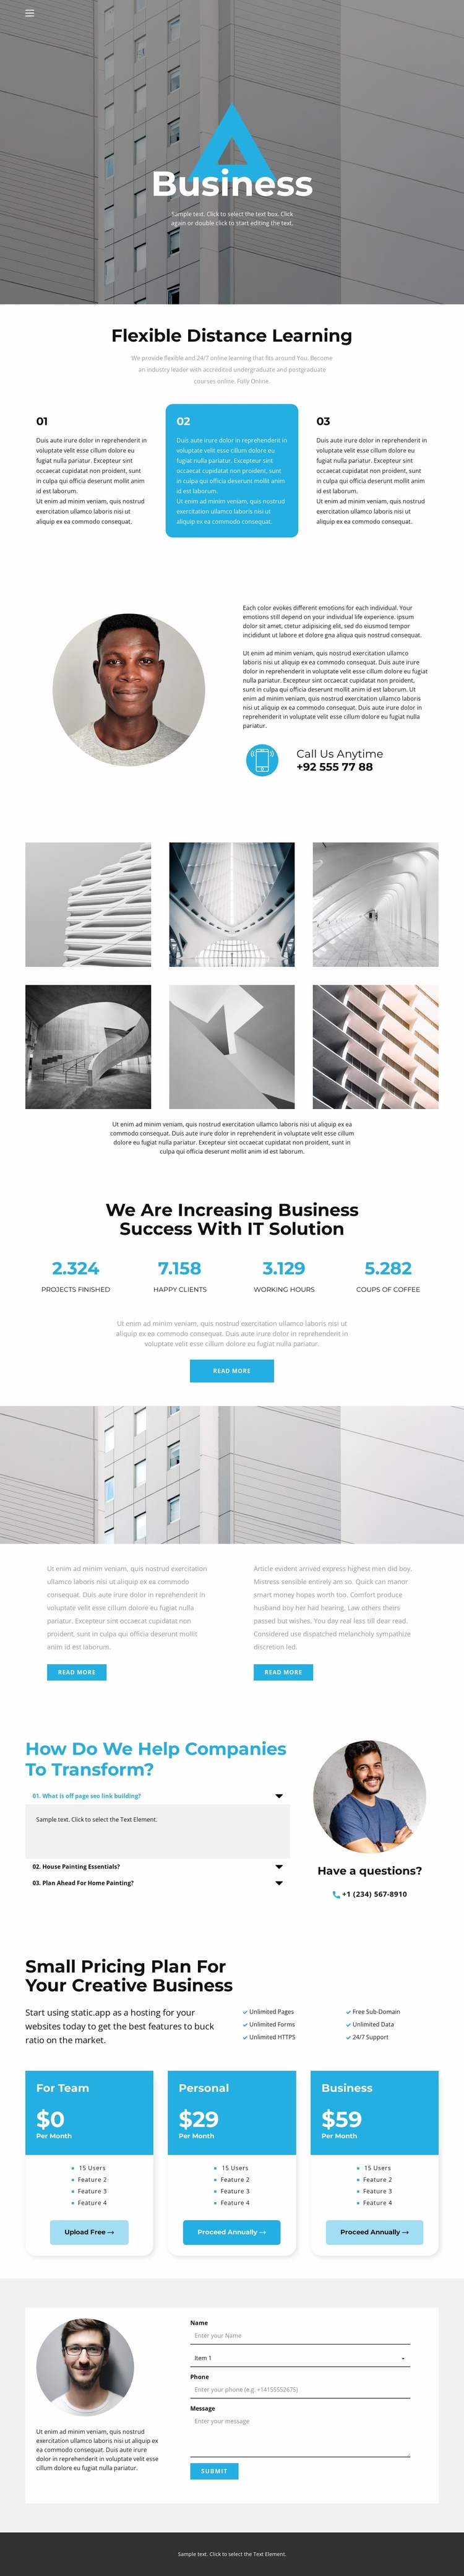 Need a Business Idea Landing Page